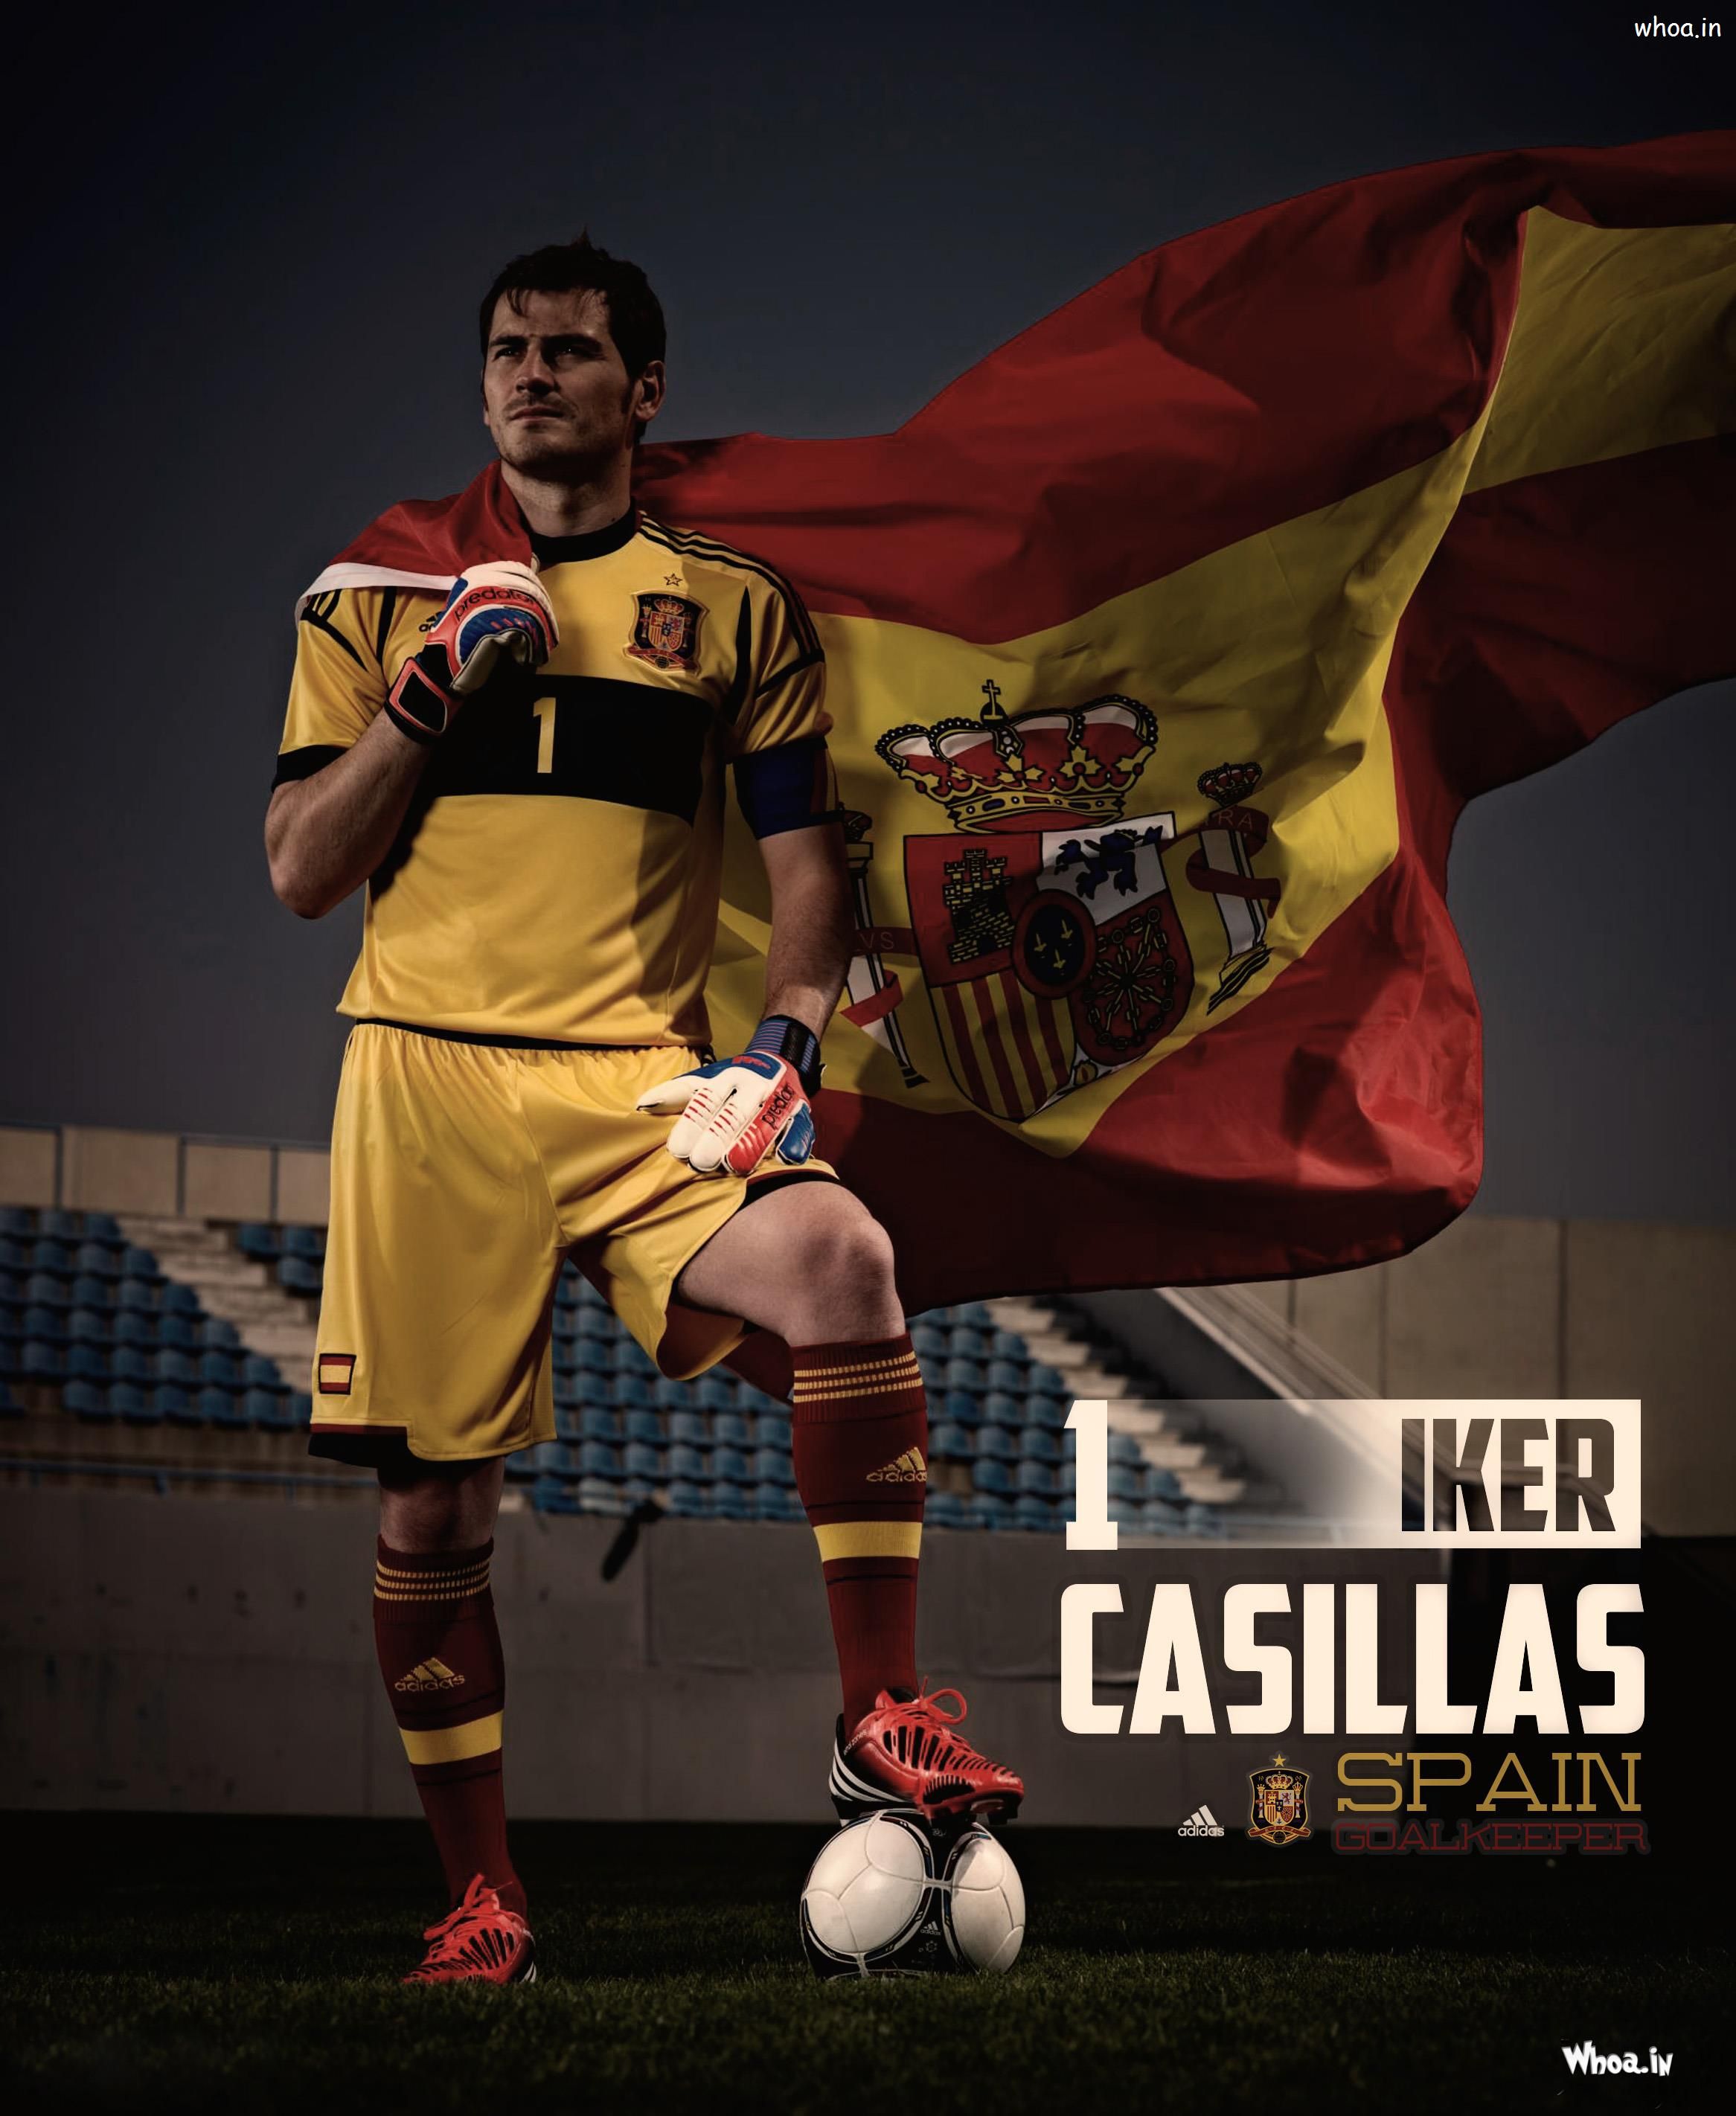 The Spain Goalkeeper Iker Casillas With Spain National Flag HD Image